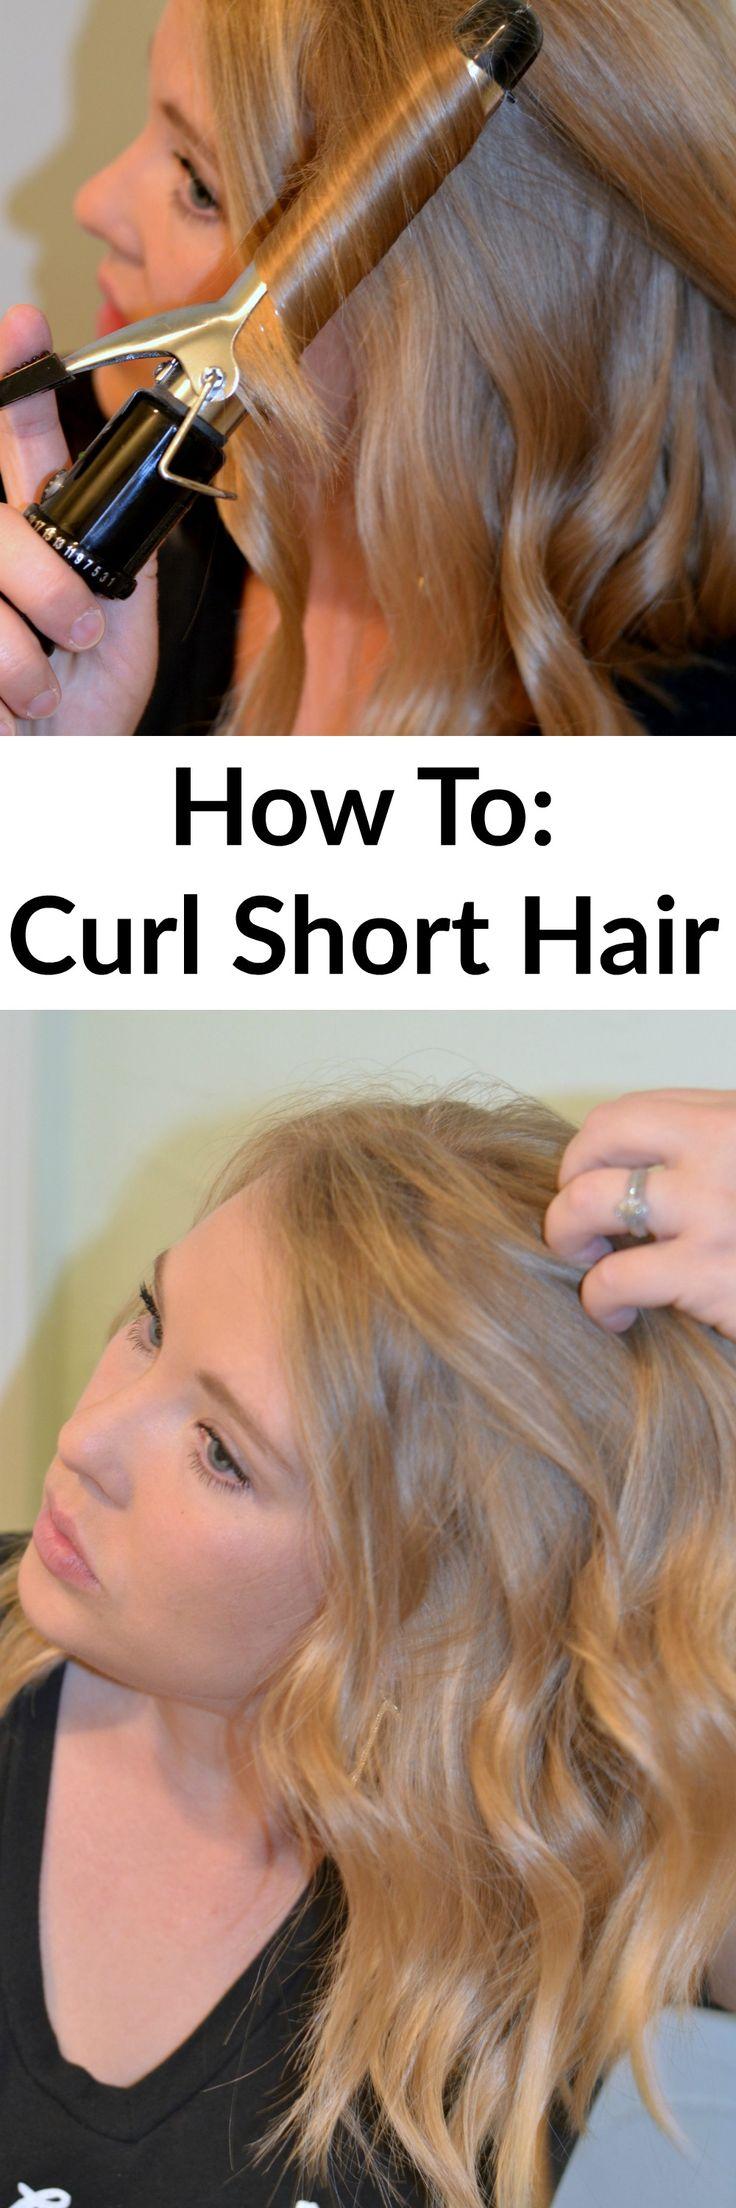 Wedding - How To: Curl Short Hair